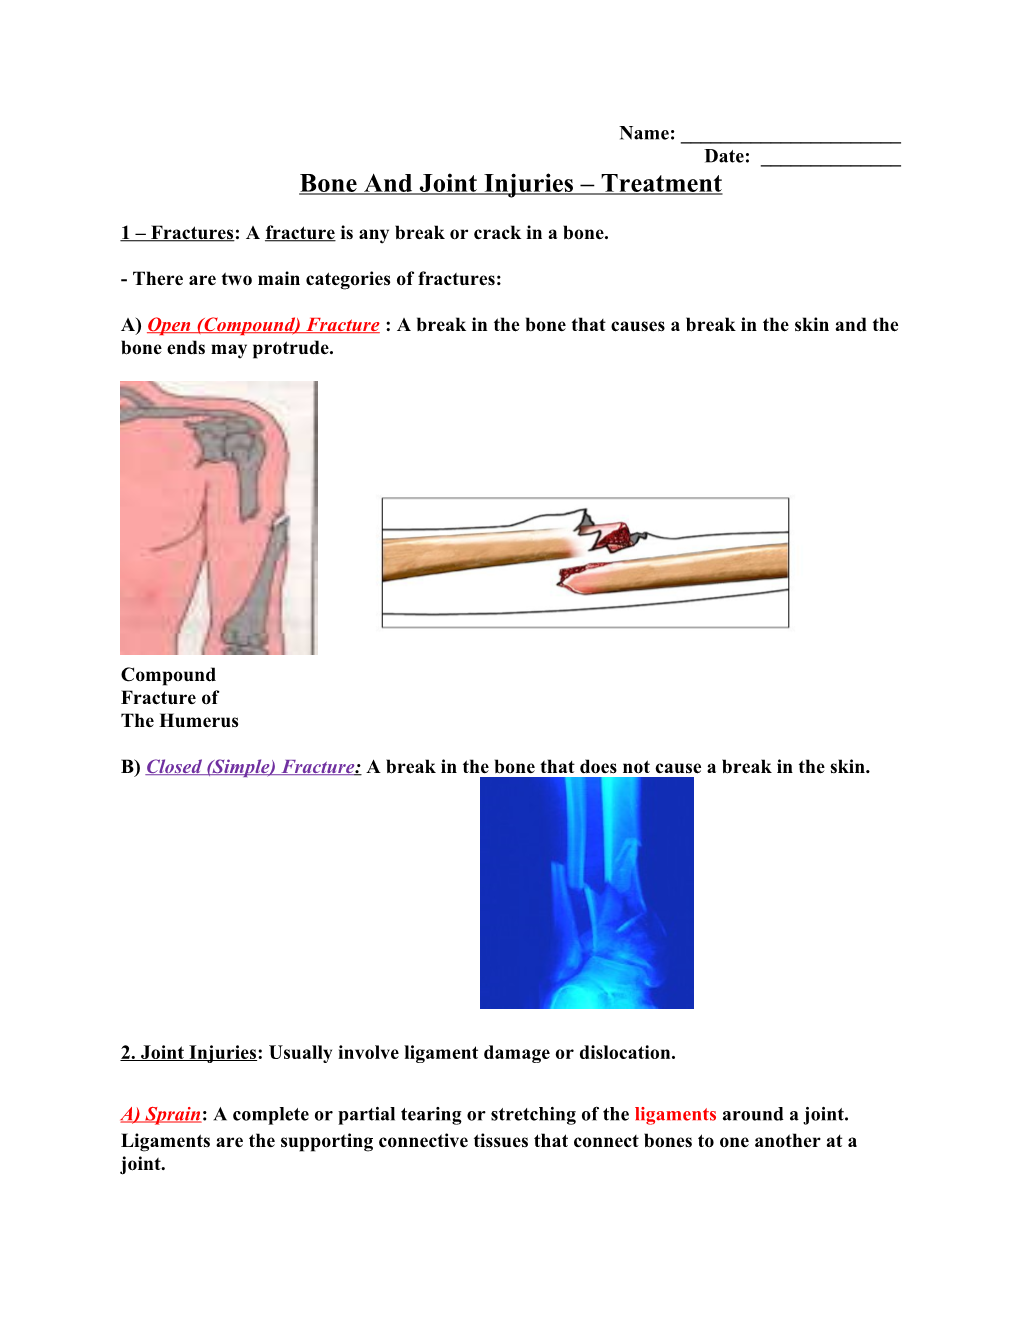 Bone and Joint Injuries Treatment